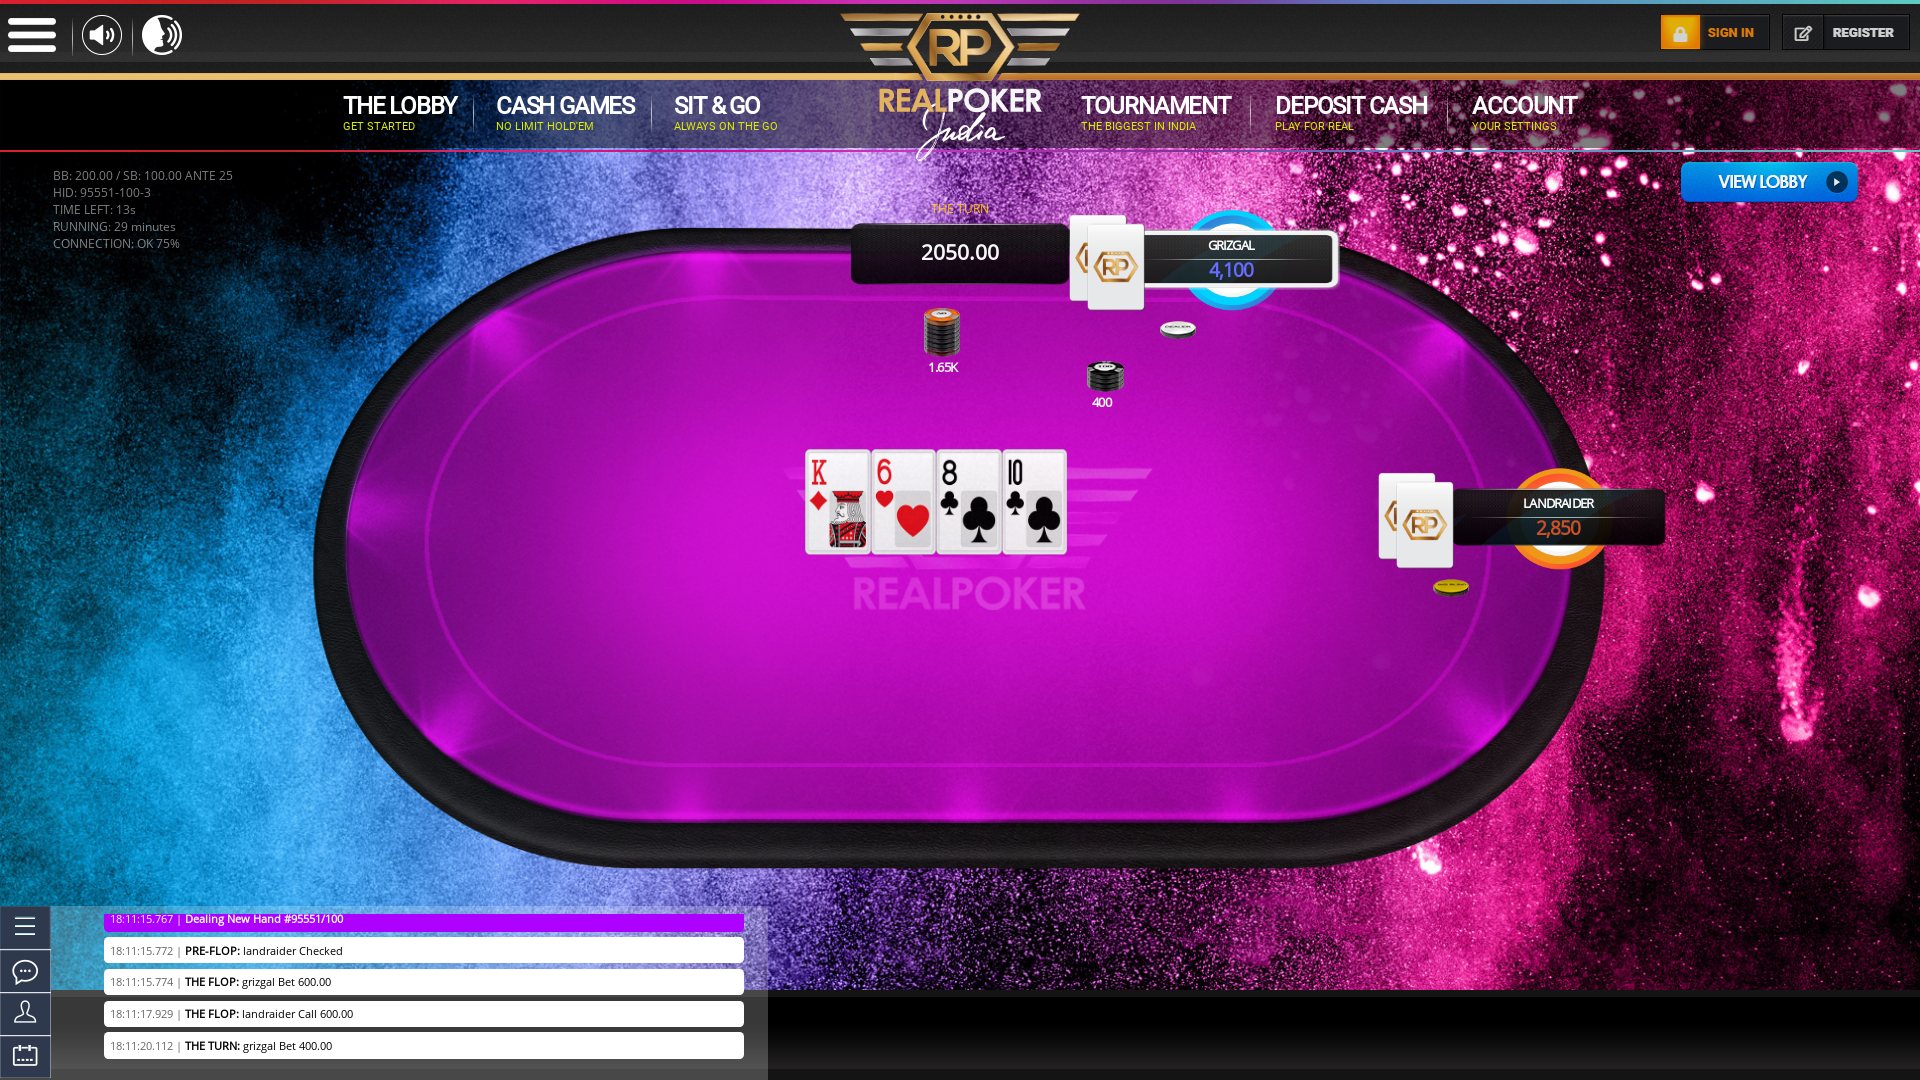 Indian online poker on a 6 player table in the 28th minute match up